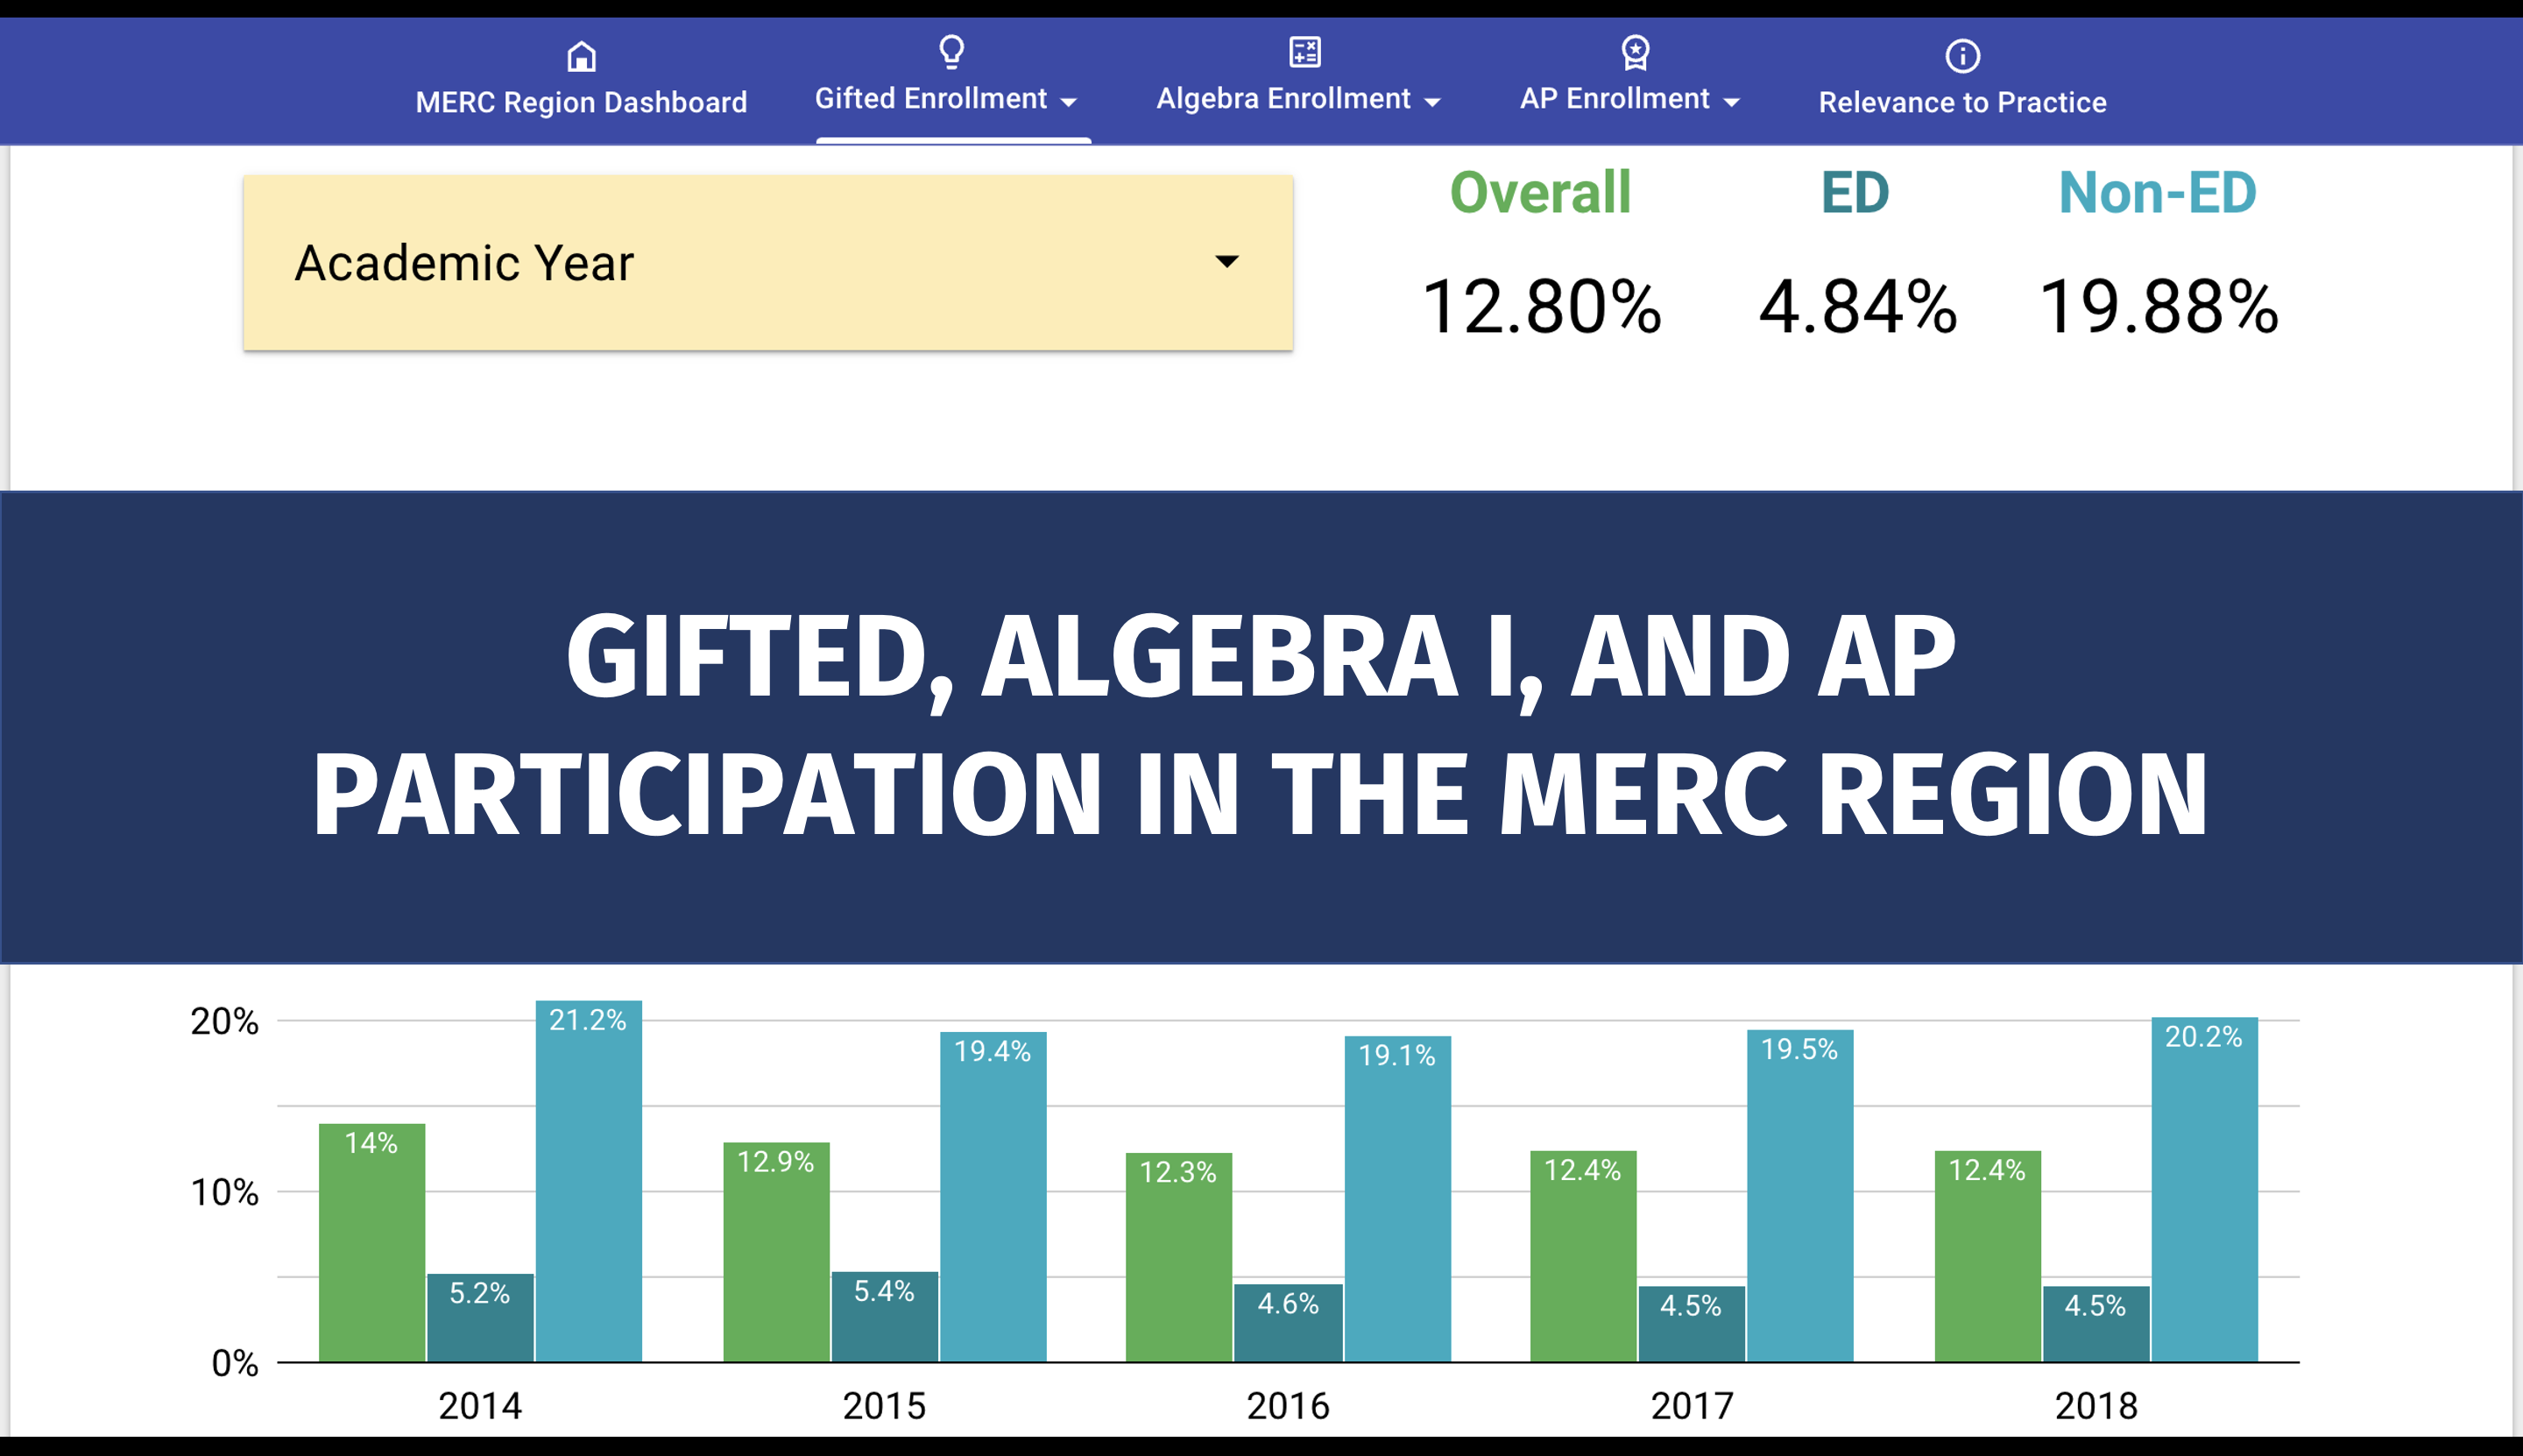 A banner image linking to MERC's dashboard depicting participation in gifted programs, Algebra I, and AP in the MERC region